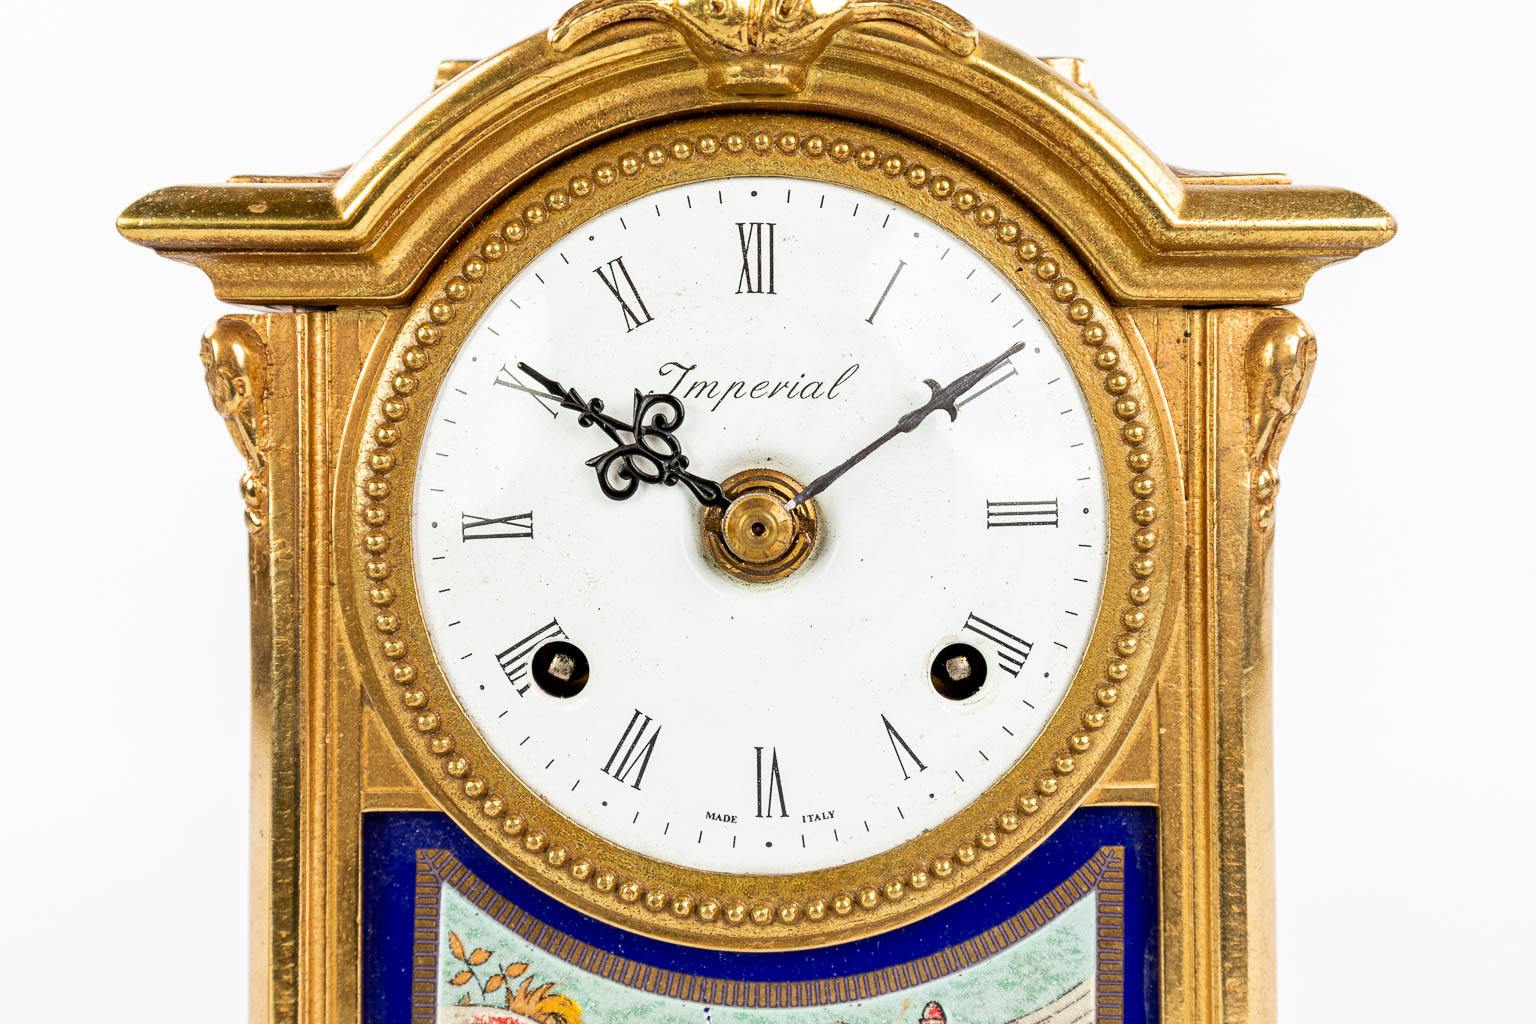 A three-piece mantle garniture clock made of bronze and porcelain and marked Imperial. (H:43cm)